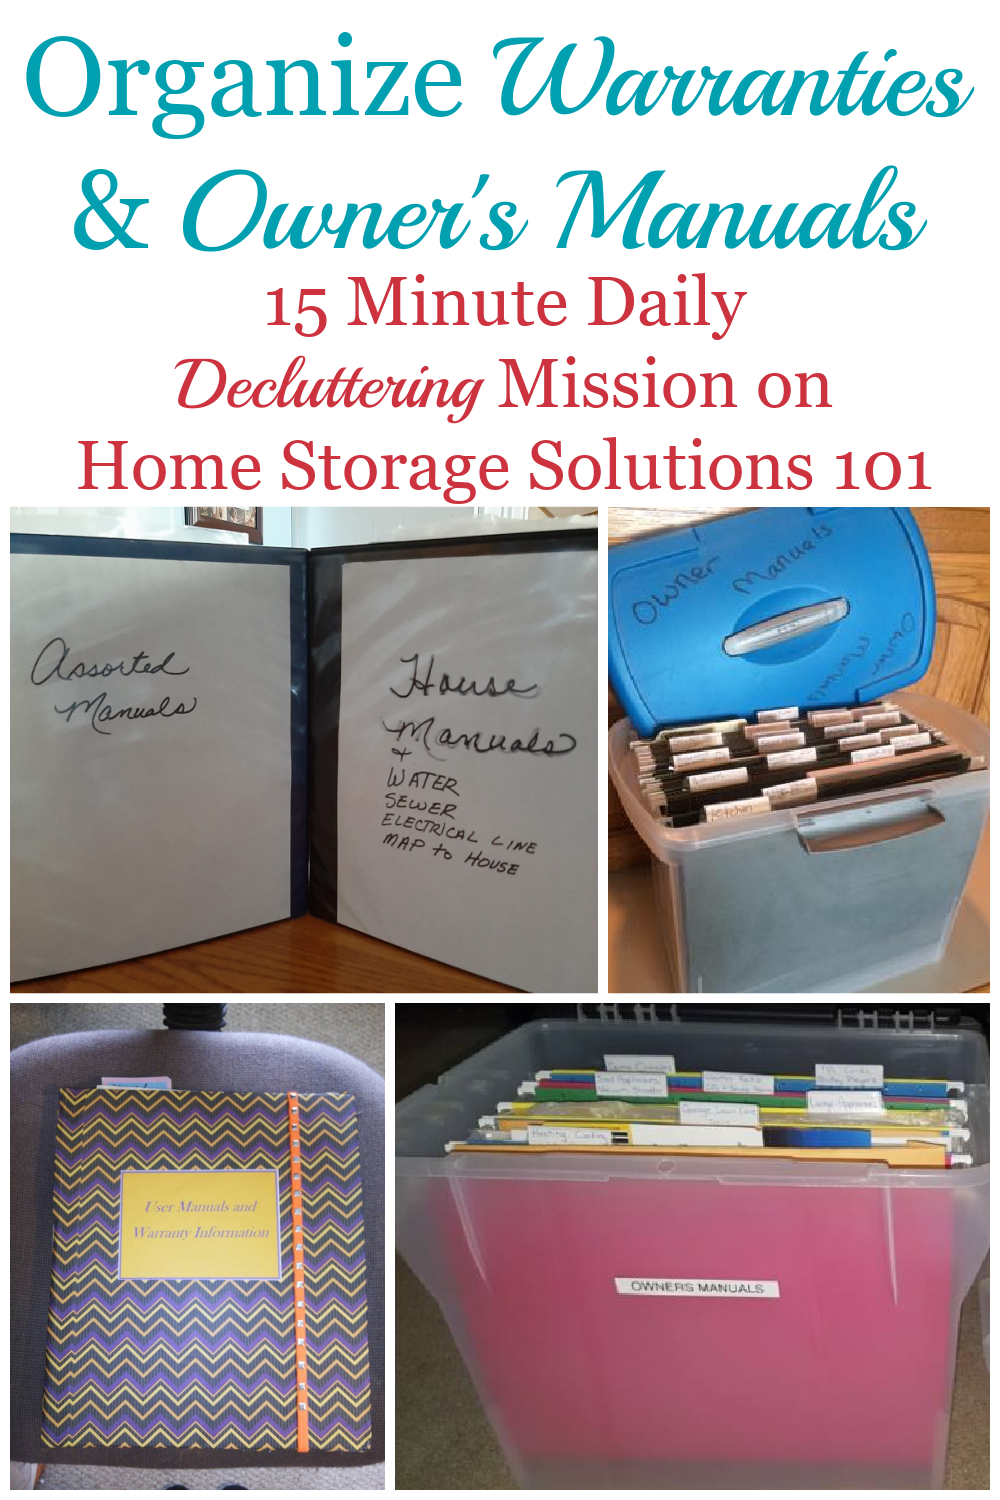 https://www.home-storage-solutions-101.com/images/400x600xorganize-warranties-and-manuals-mission-pinterest-image.png.pagespeed.ic.77Np8u1NNG.jpg